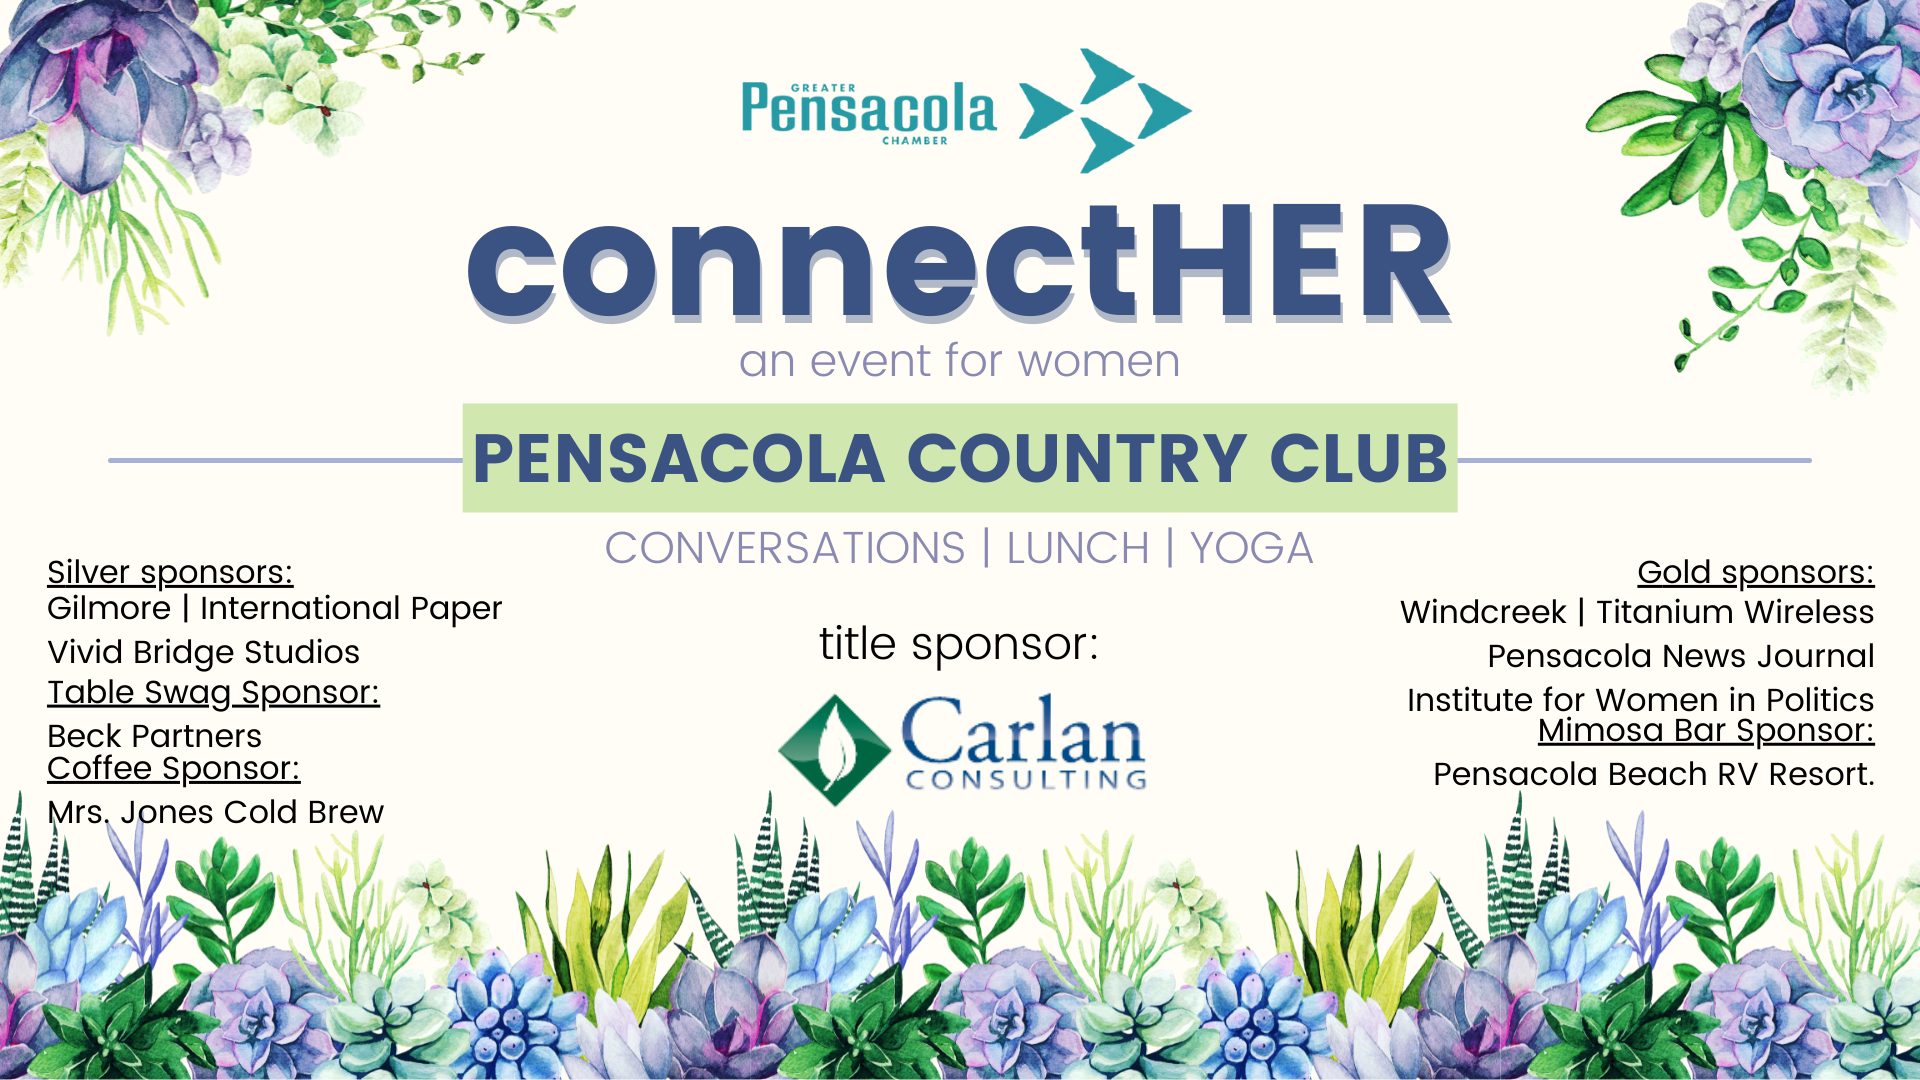 2021 ConnectHer Women's Event Details